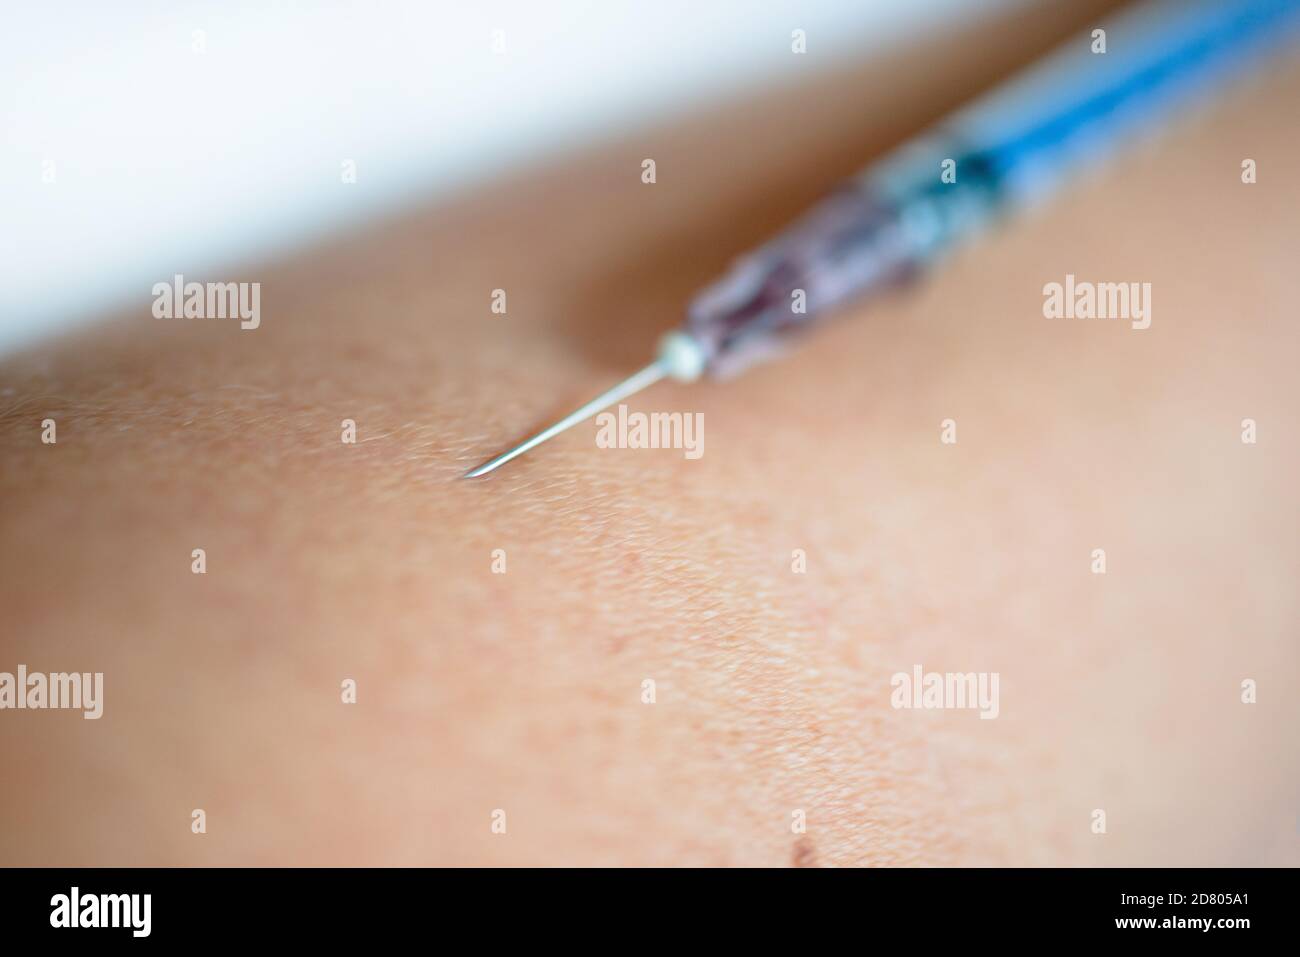 The syringe needle sticks into the skin.Getting vaccinated. Stock Photo